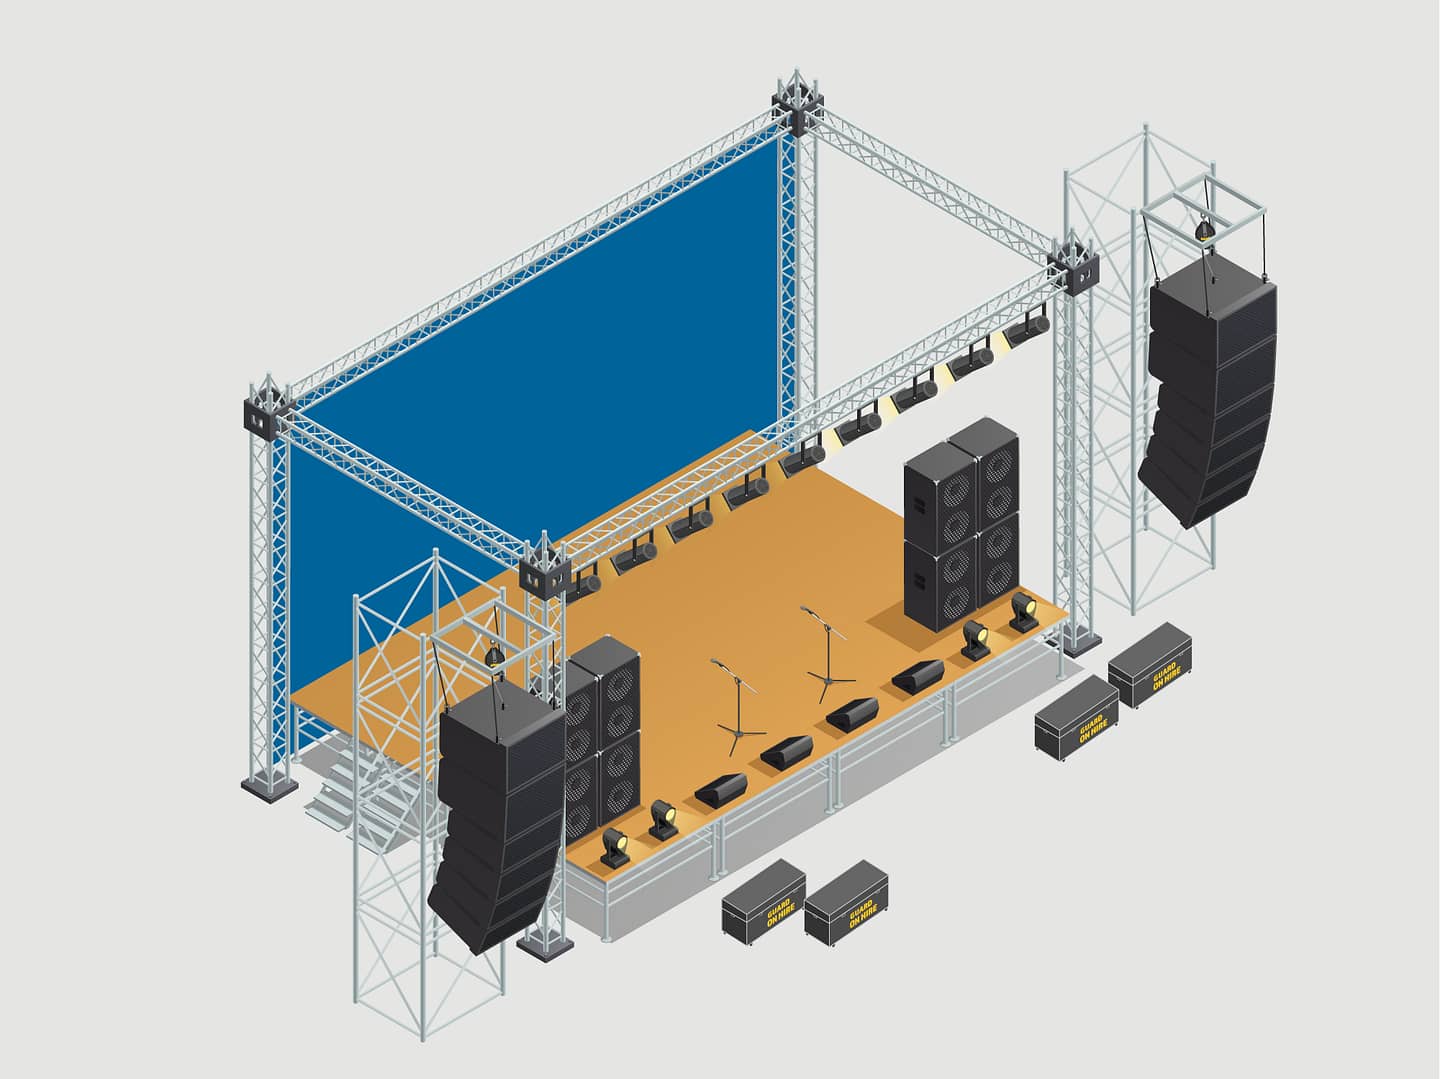 Guard load arrestors on hire, protecting speaker cabs that are suspended at height